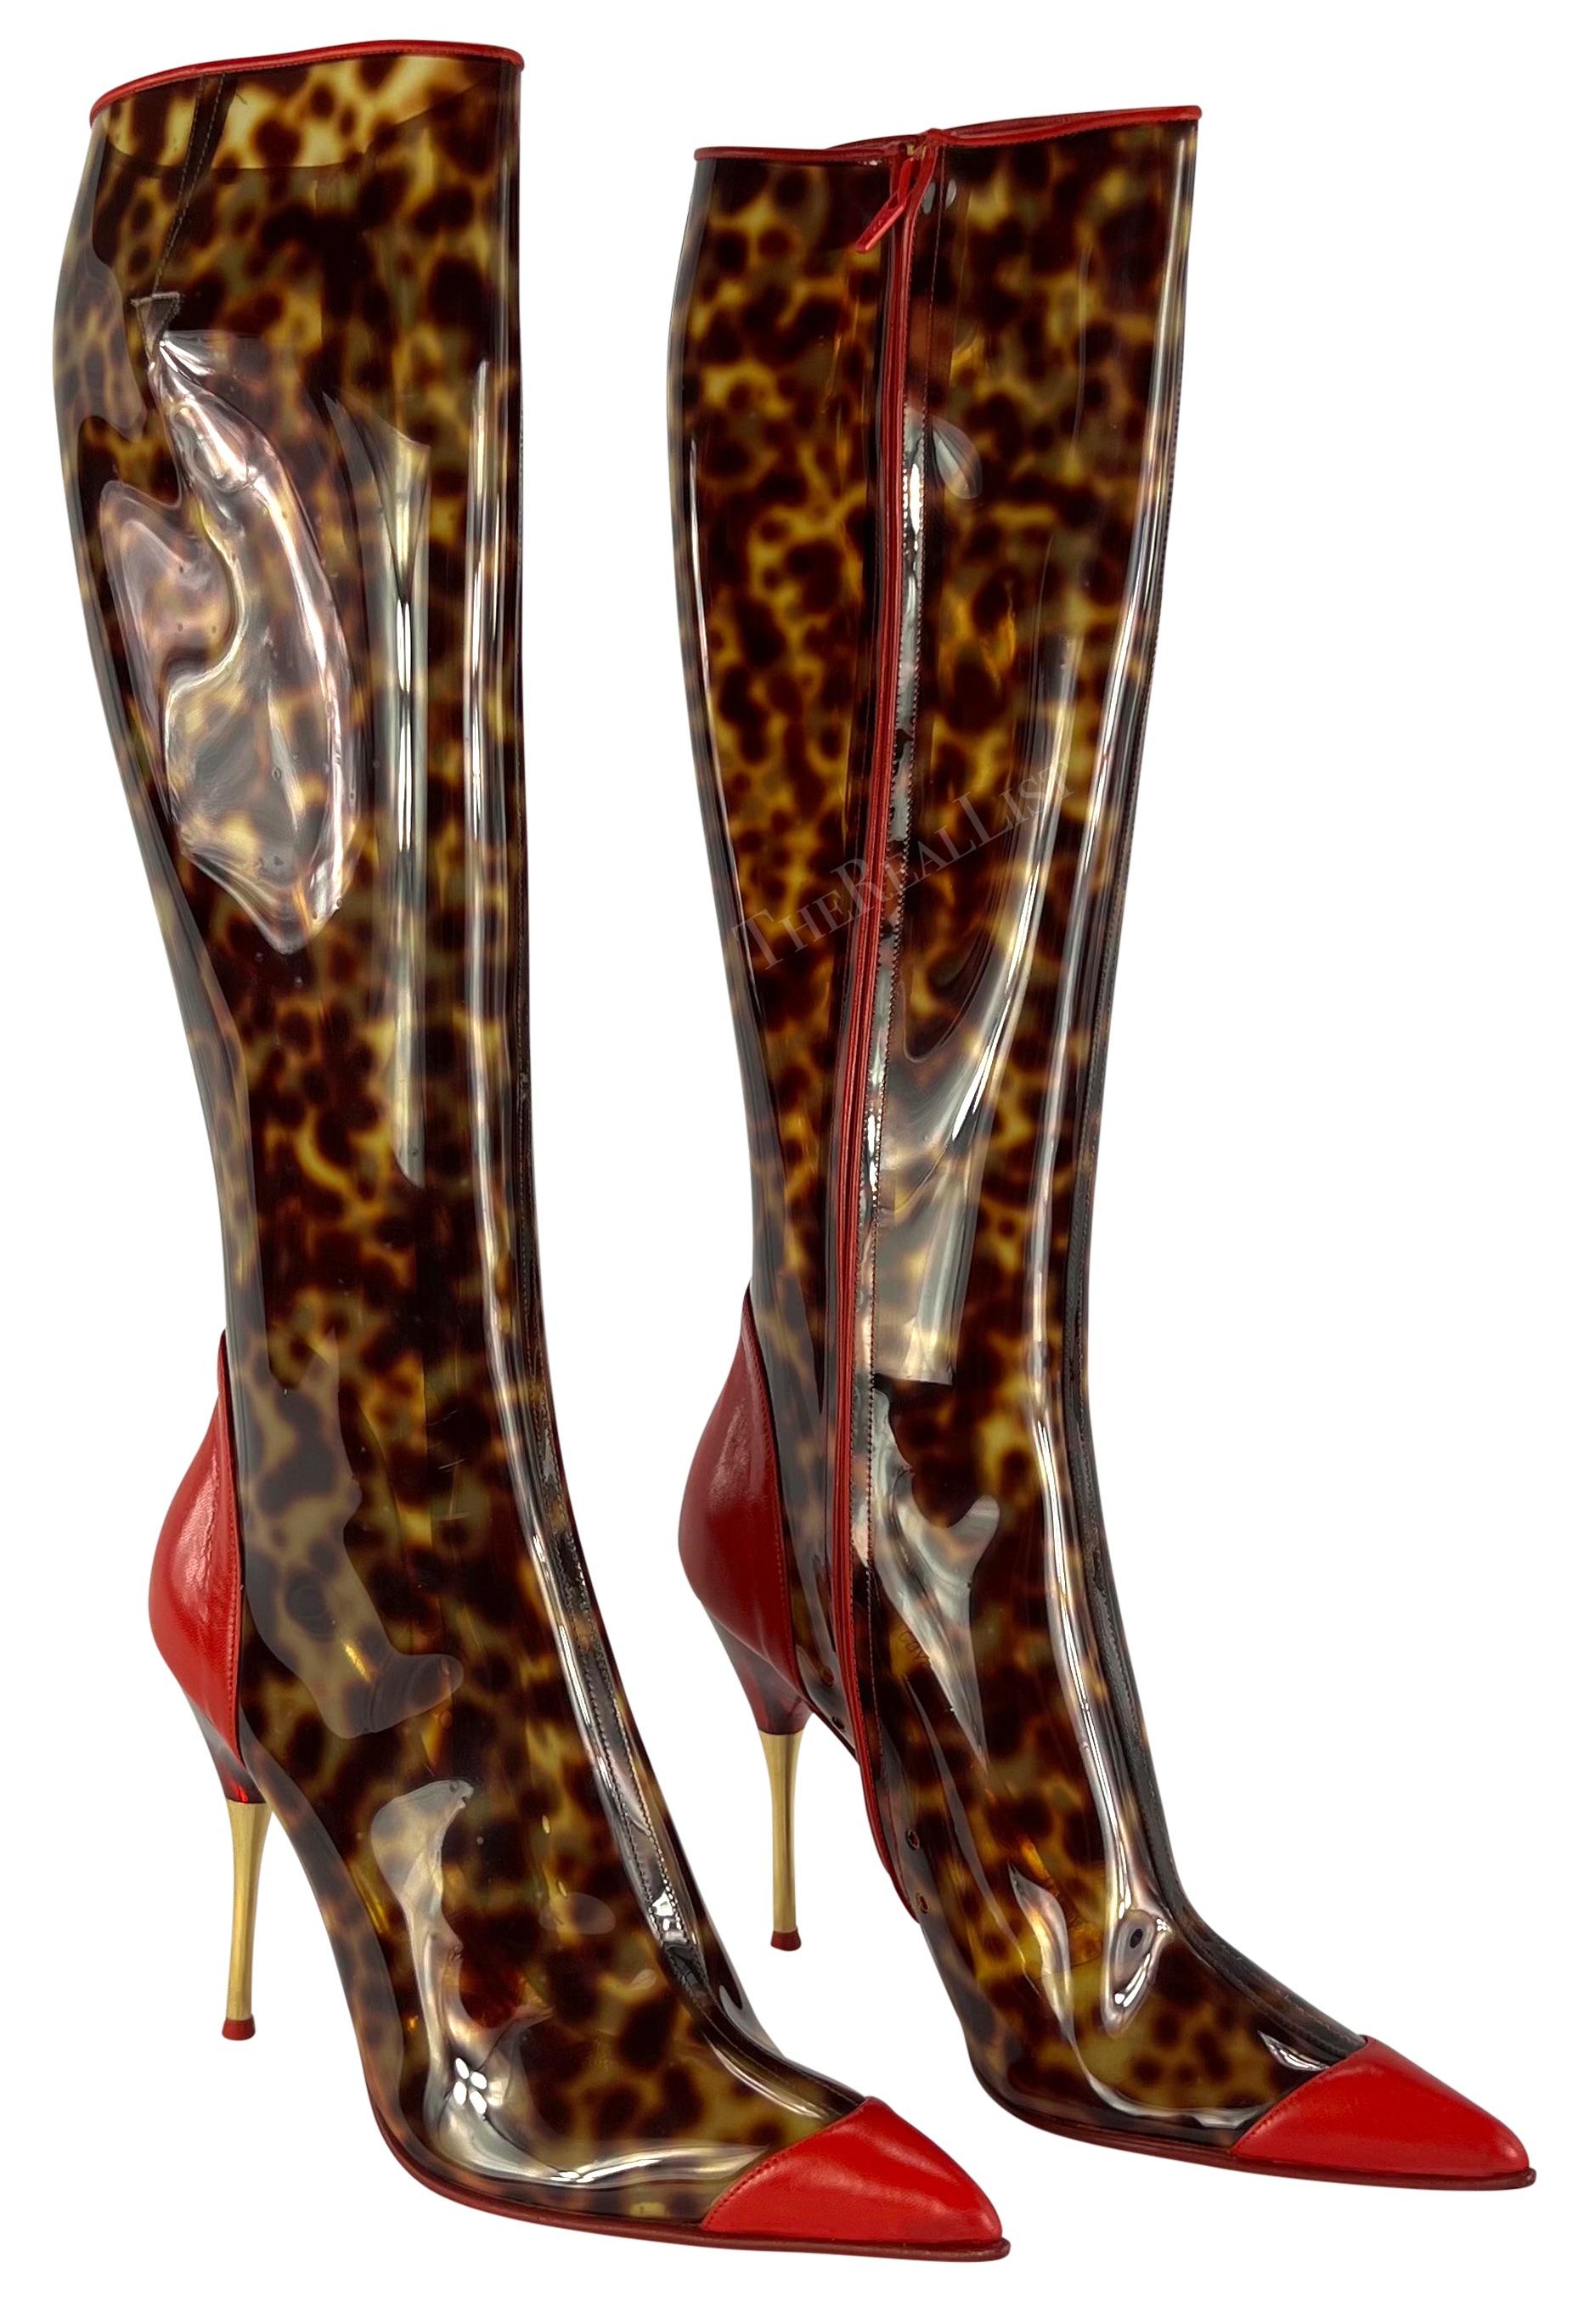 NWT S/S 2003 Roberto Cavalli Cheetah Print PVC Transparent Boots Size 39 In Excellent Condition For Sale In West Hollywood, CA